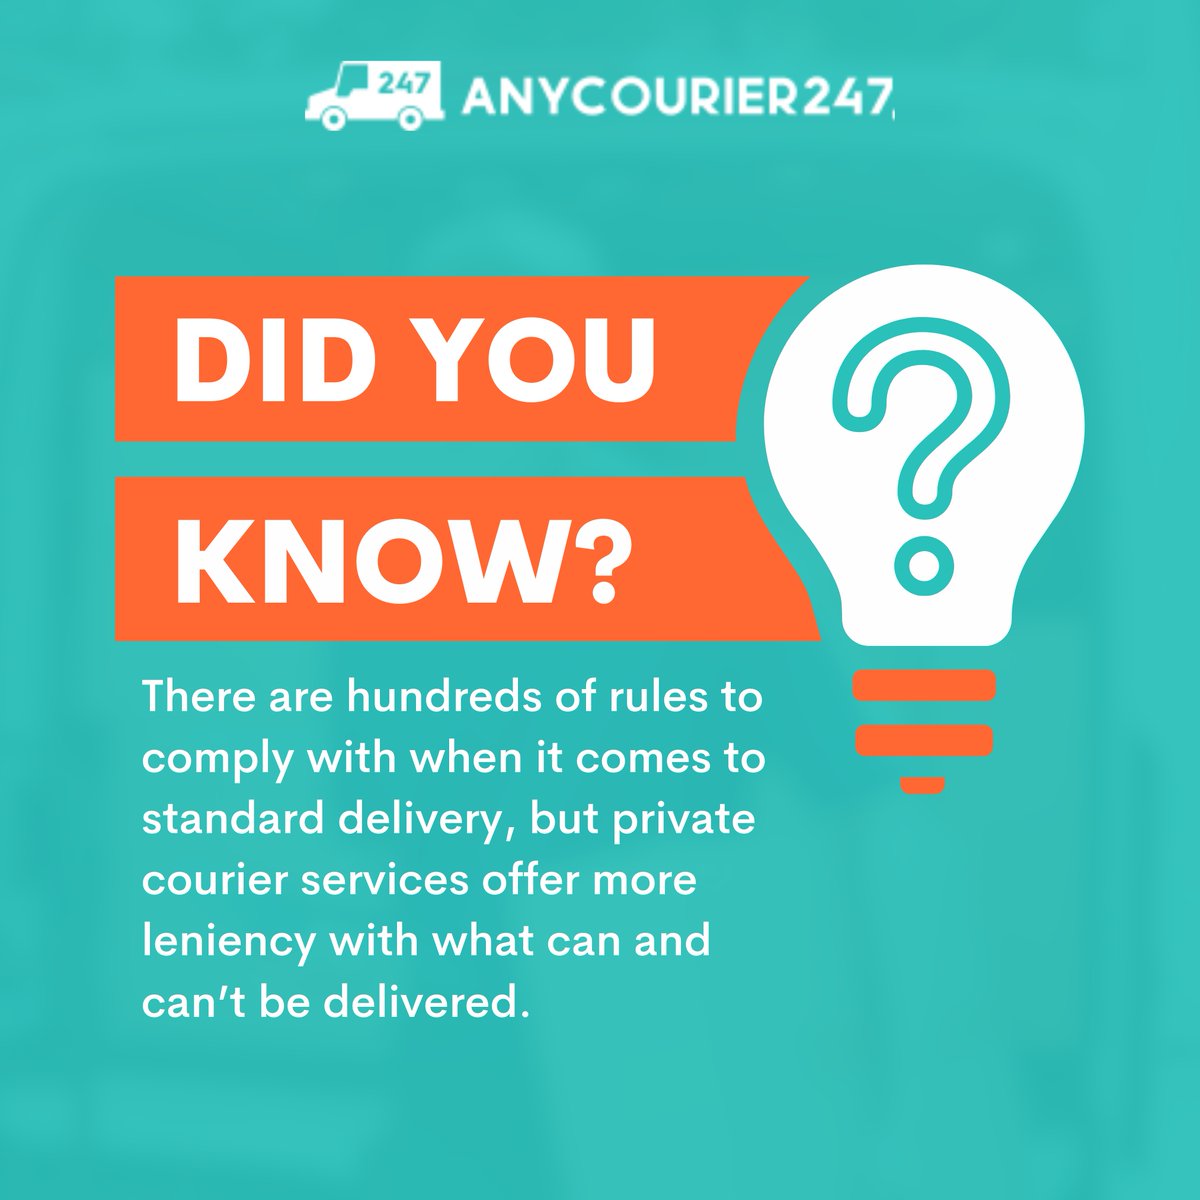 Private courier services offer flexibility beyond standard delivery regulations. 🚚 Enjoy the freedom to ship a wider range of items with fewer restrictions. Experience convenience and efficiency without compromising on what you can send. 
#anycourier247 #couriermarketplace